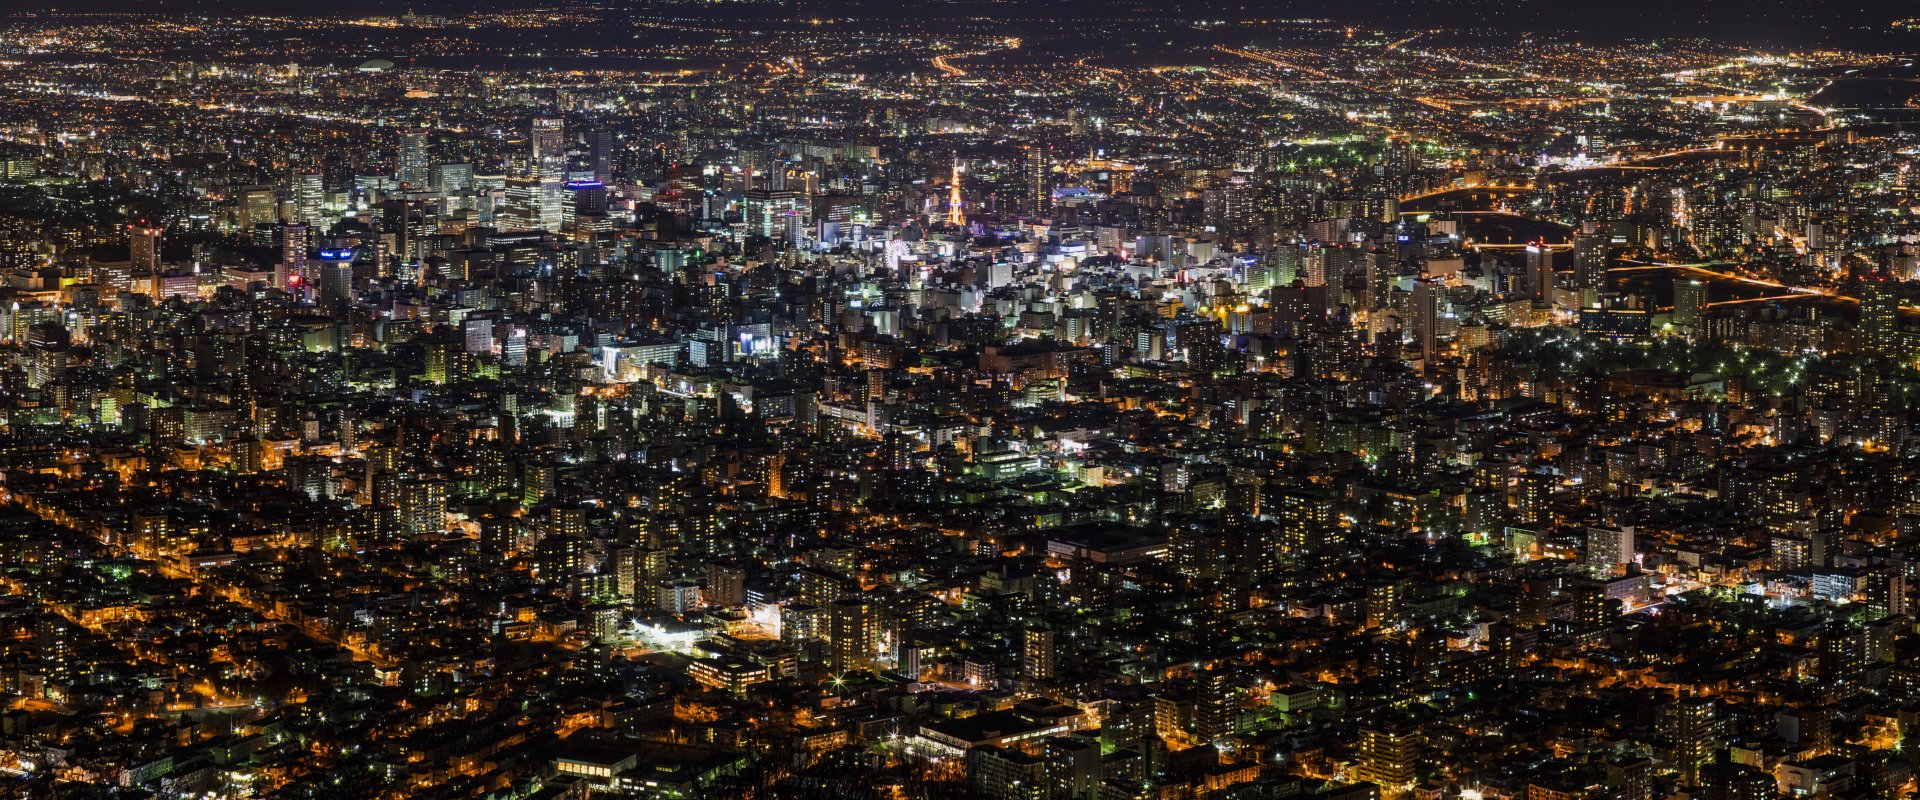 Download Aerial Cityscape Night City Japan Man Made Sapporo  4k Ultra HD Wallpaper